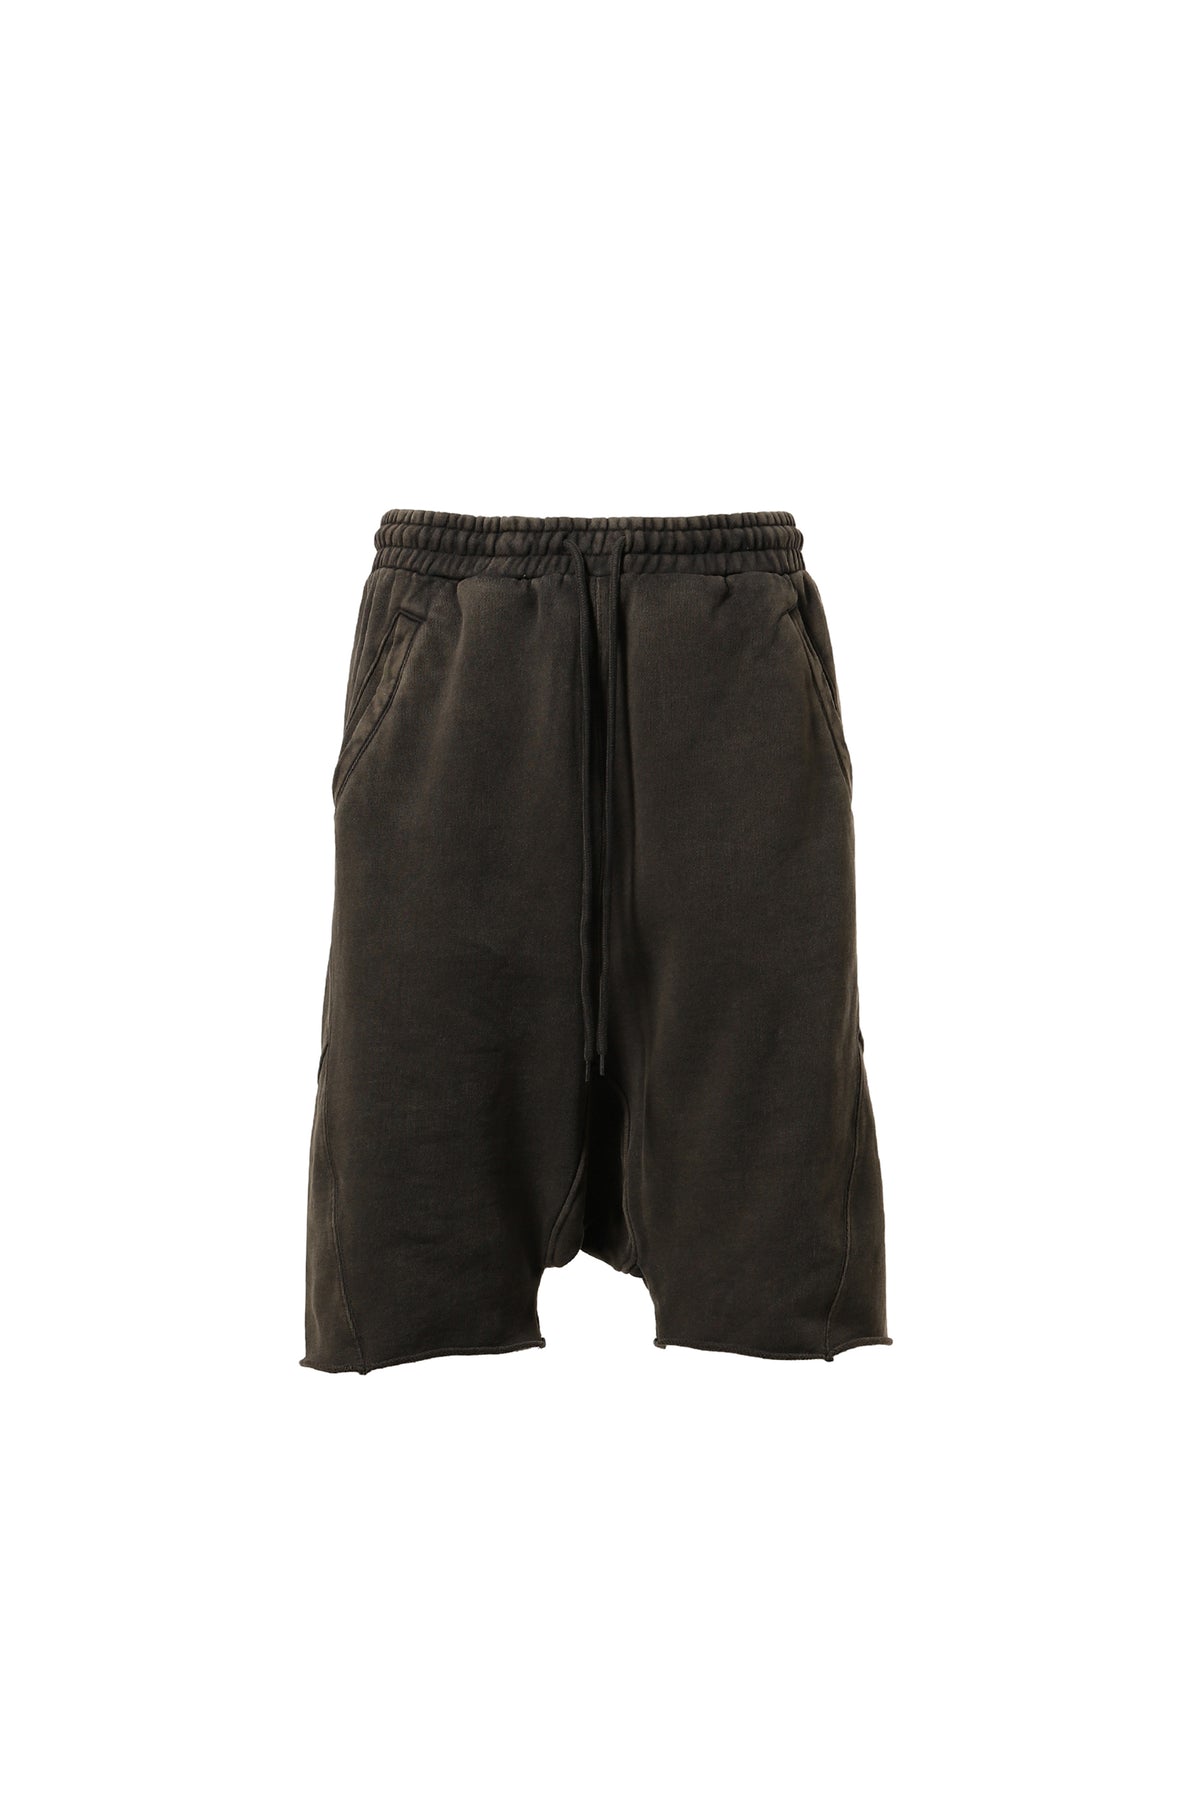 HEAVY DROP SHORT / WASHED BLK